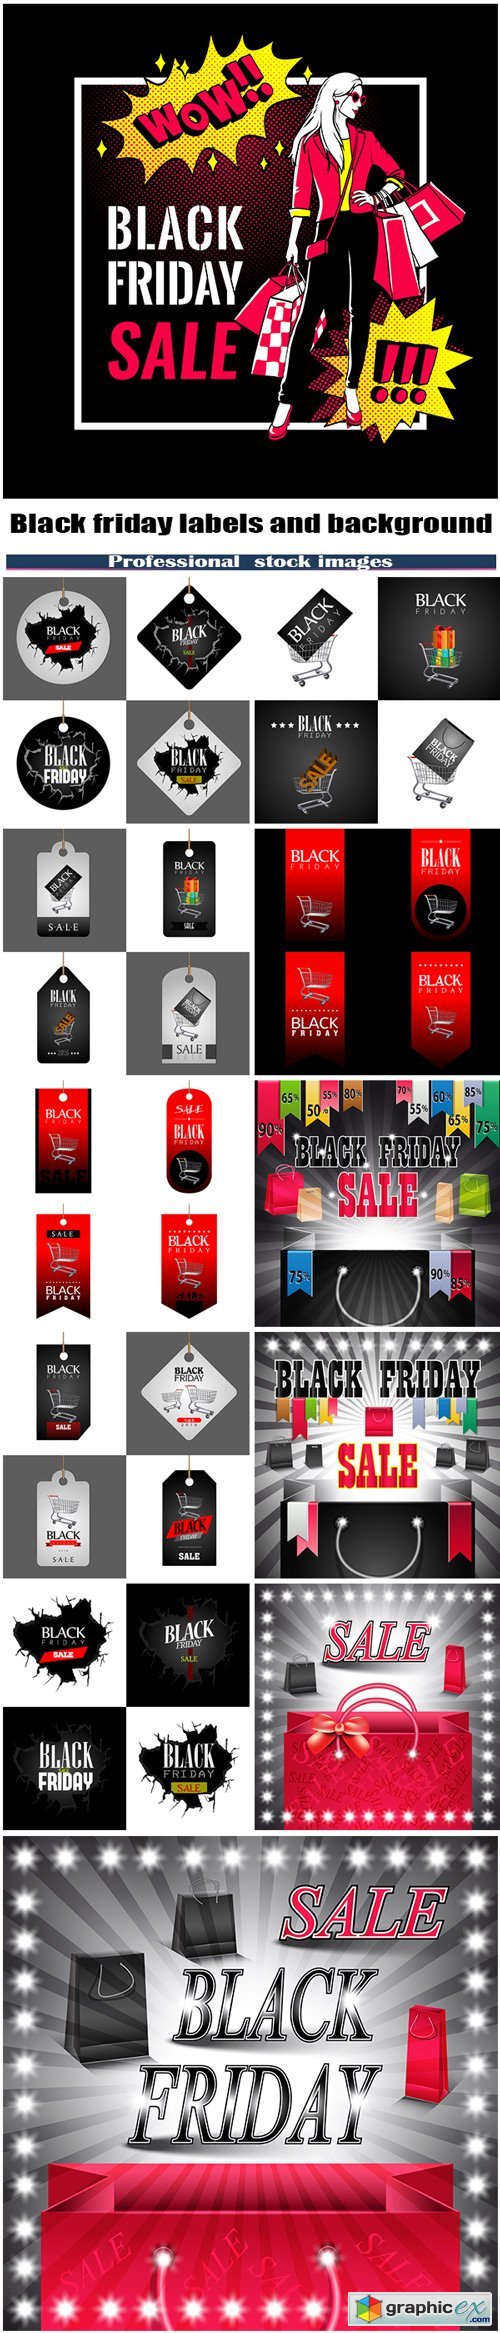 Black friday labels and background